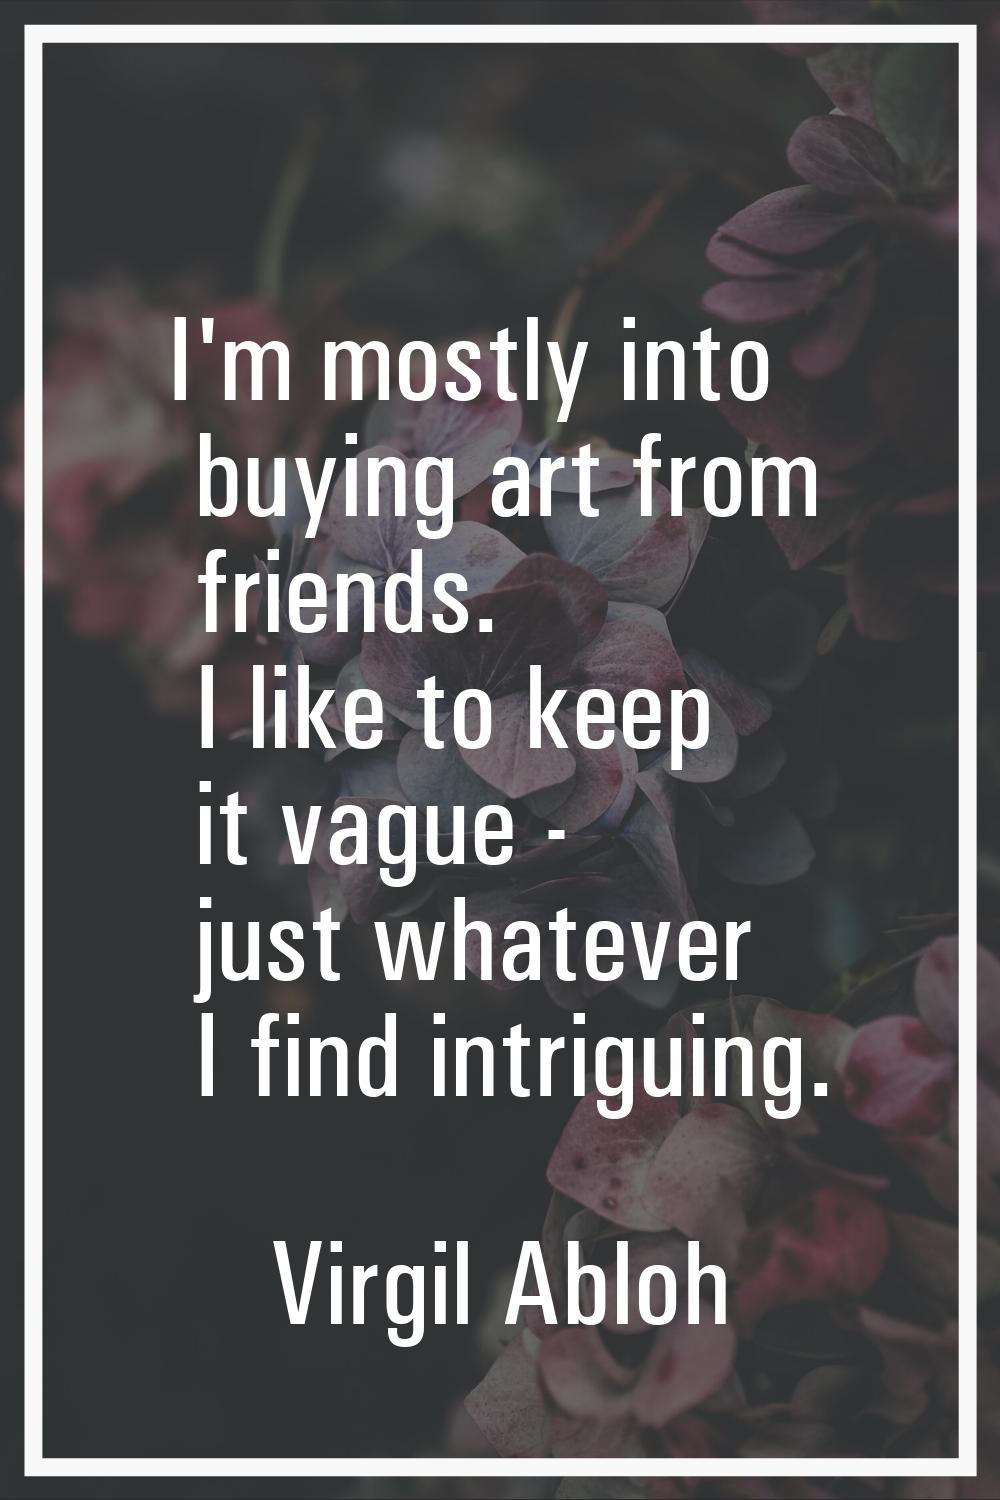 I'm mostly into buying art from friends. I like to keep it vague - just whatever I find intriguing.